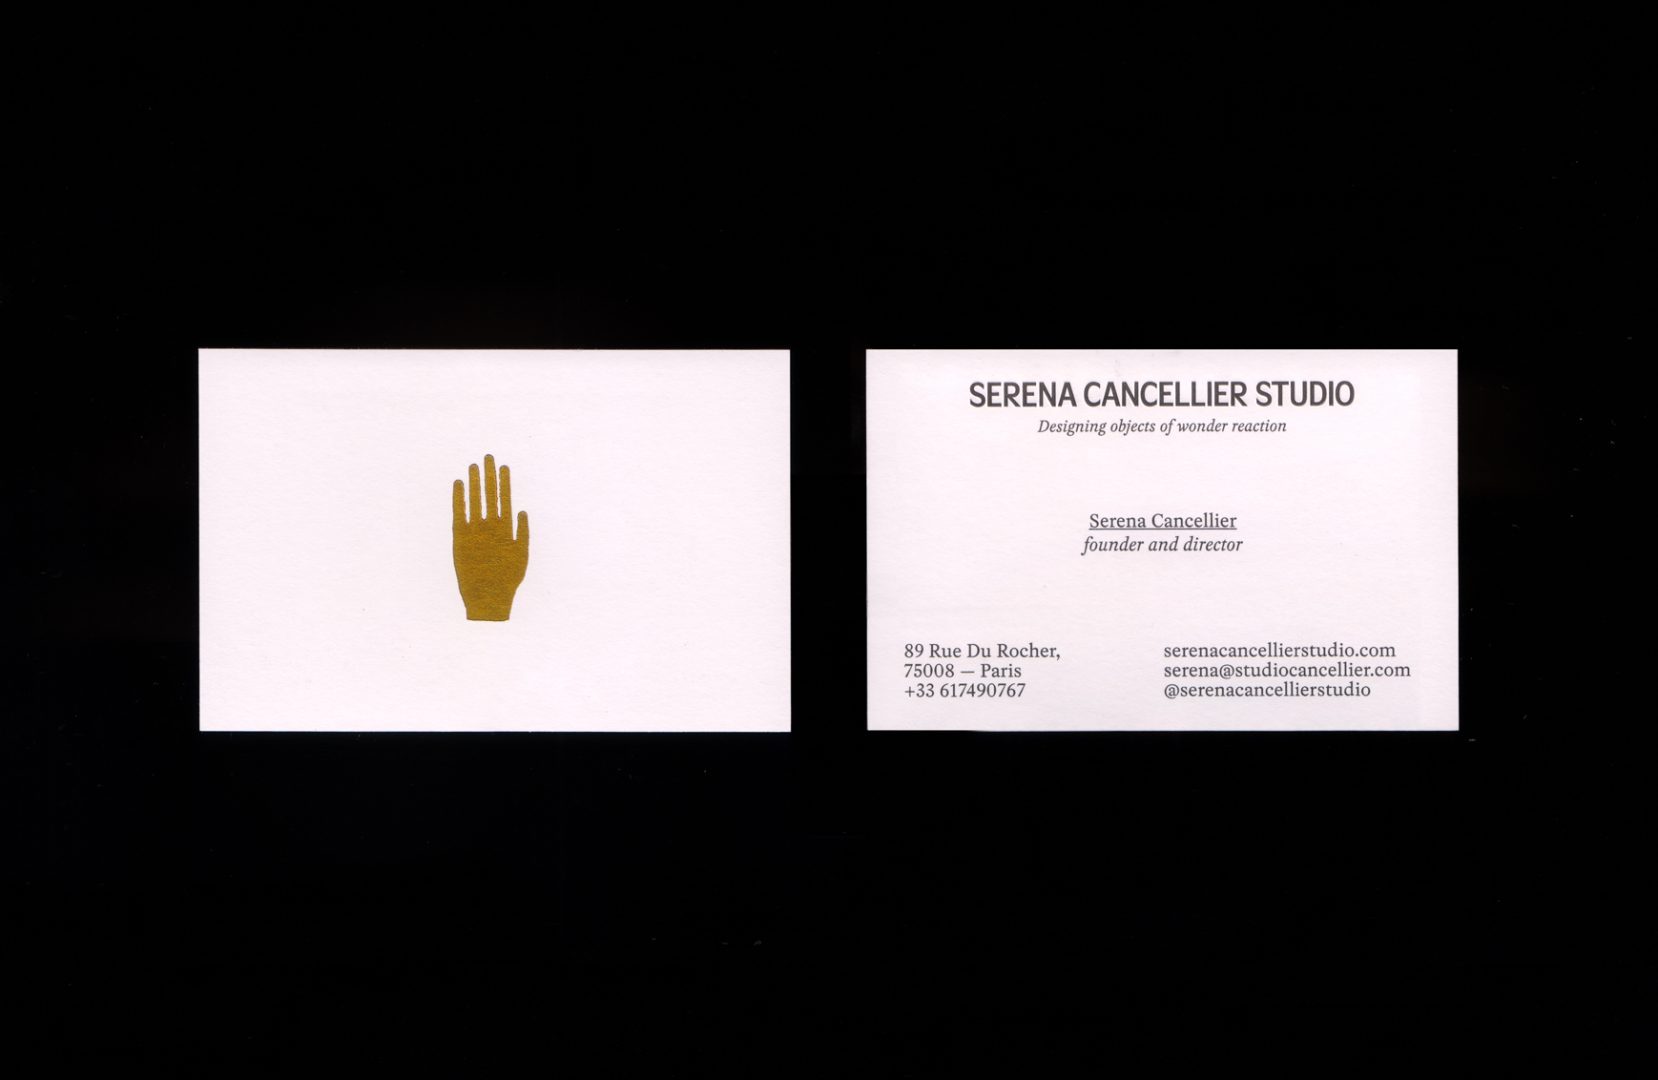 Serena Cancellier Studio, Art Direction and Branding, Photographed by Riccardo Raspa